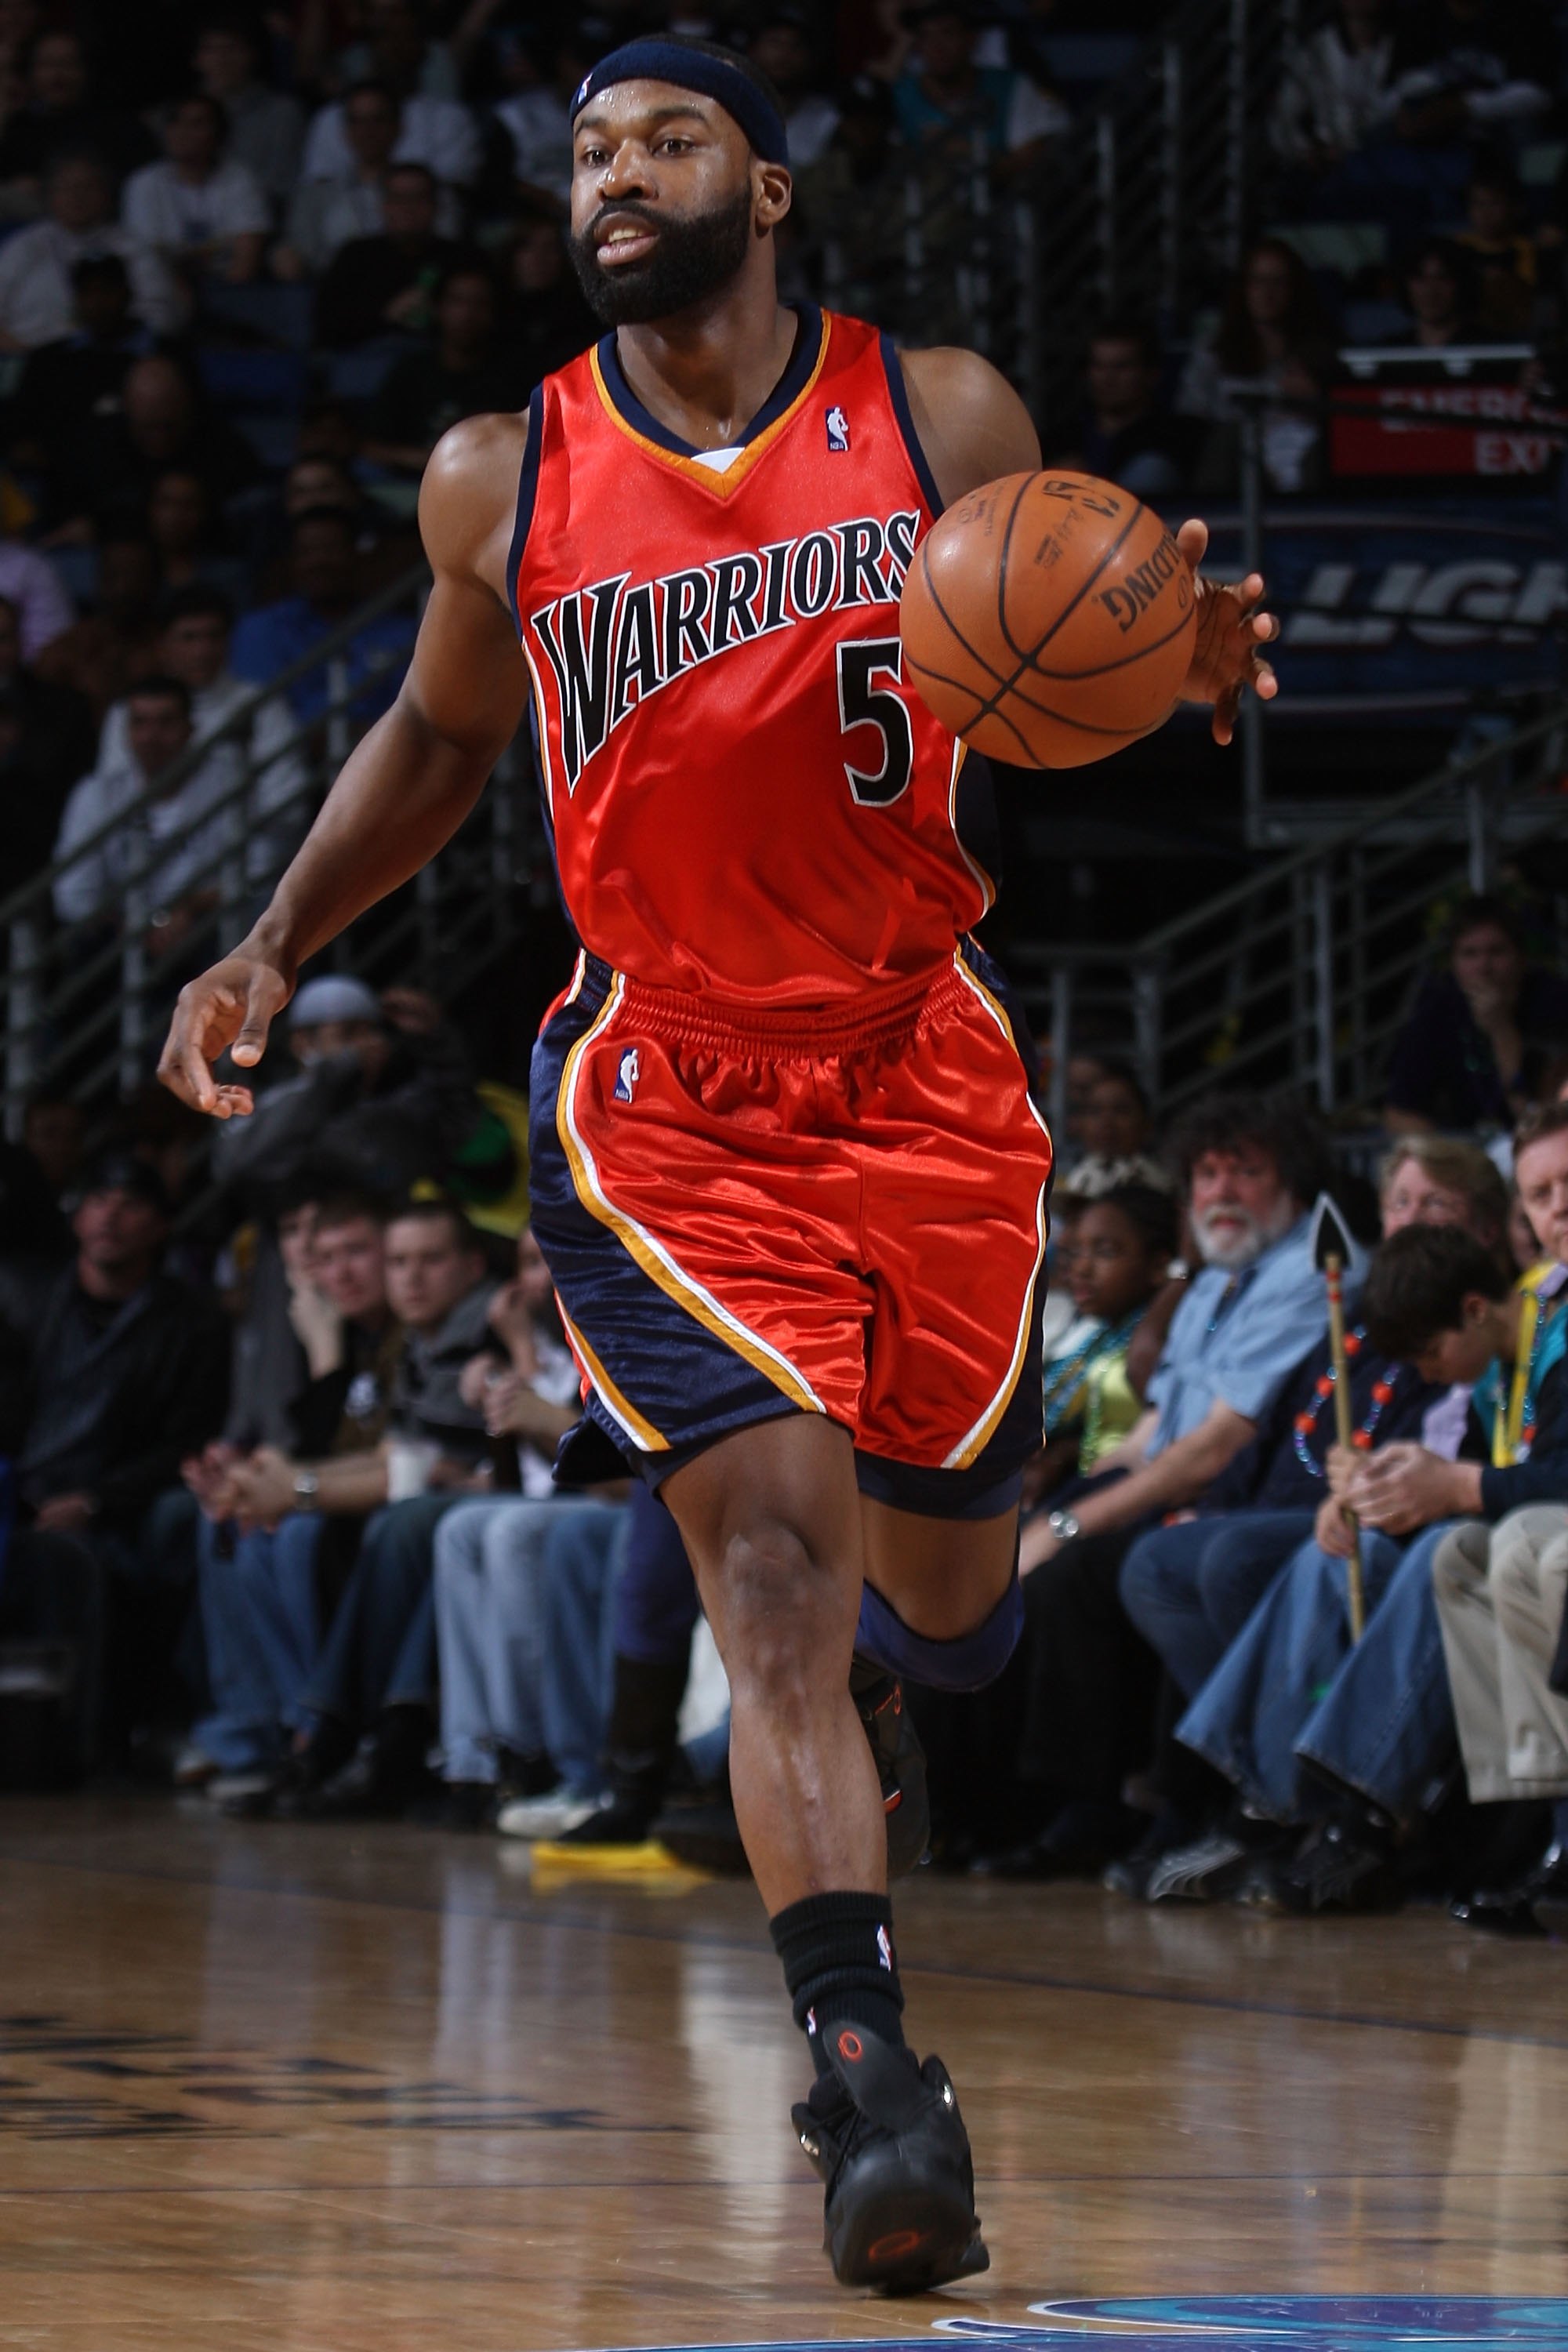 RUMOR: Clippers to offer Warriors Baron Davis for Corey Maggette